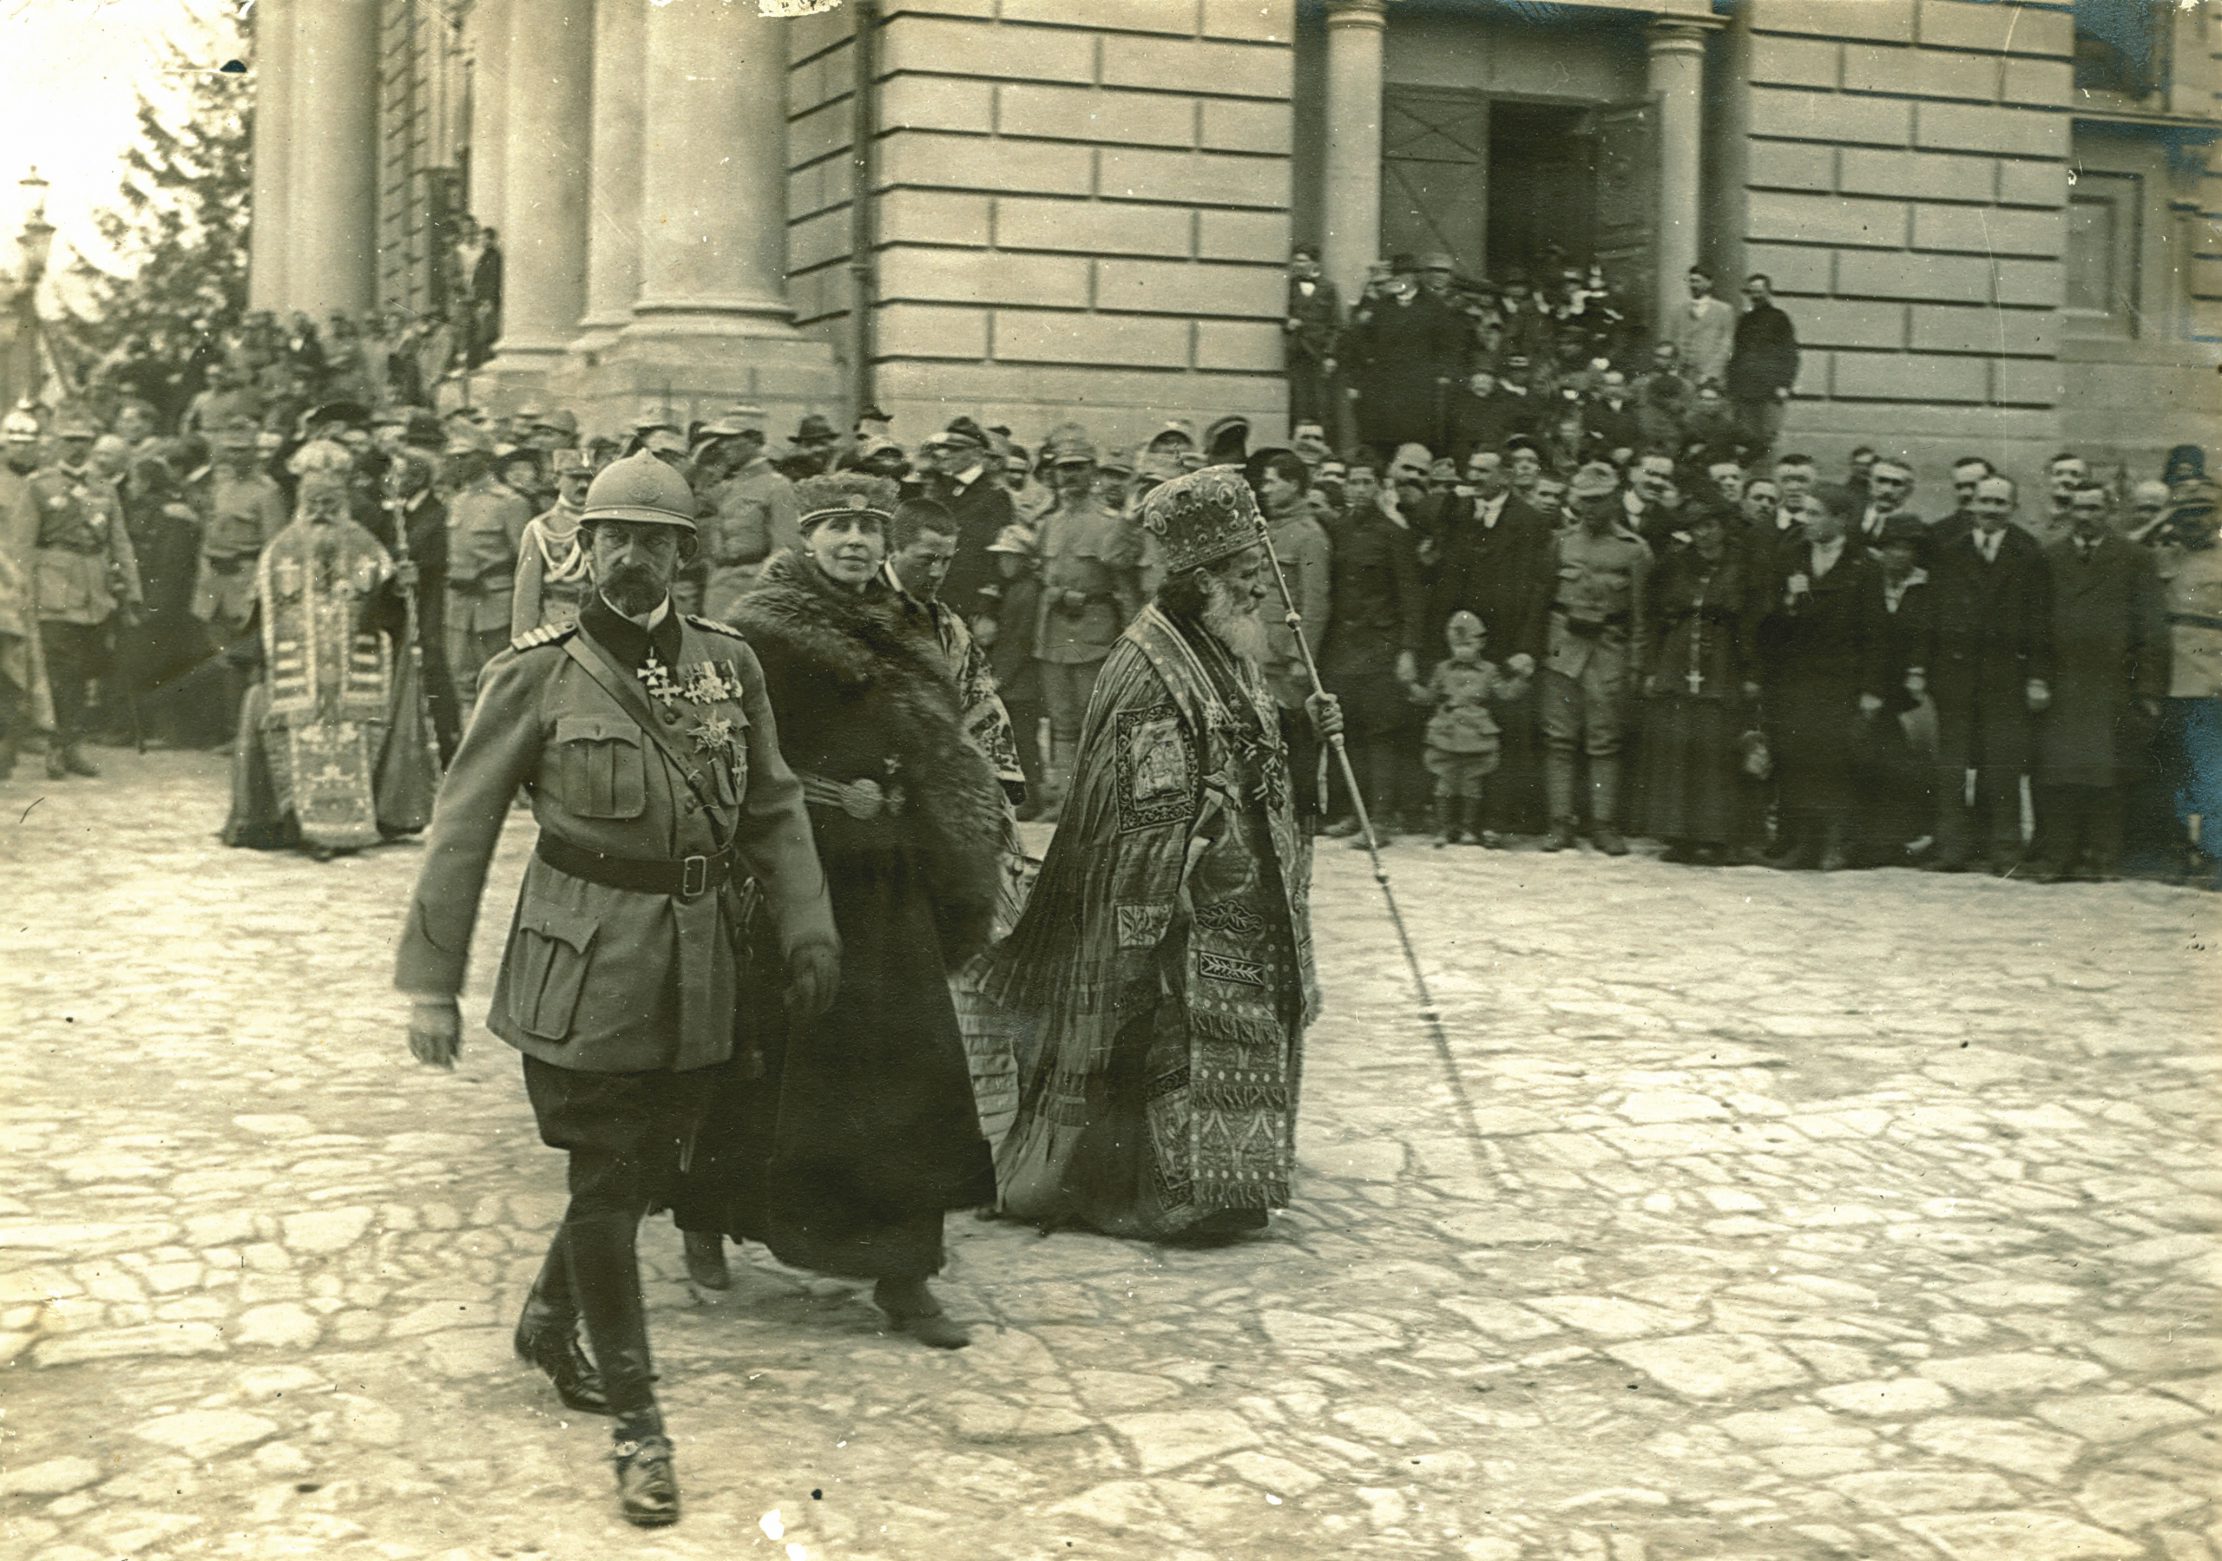 King Ferdinand and Queen Maria participate in the Bessarabian union celebration. Iasi, March 30, 1918 (ANR)